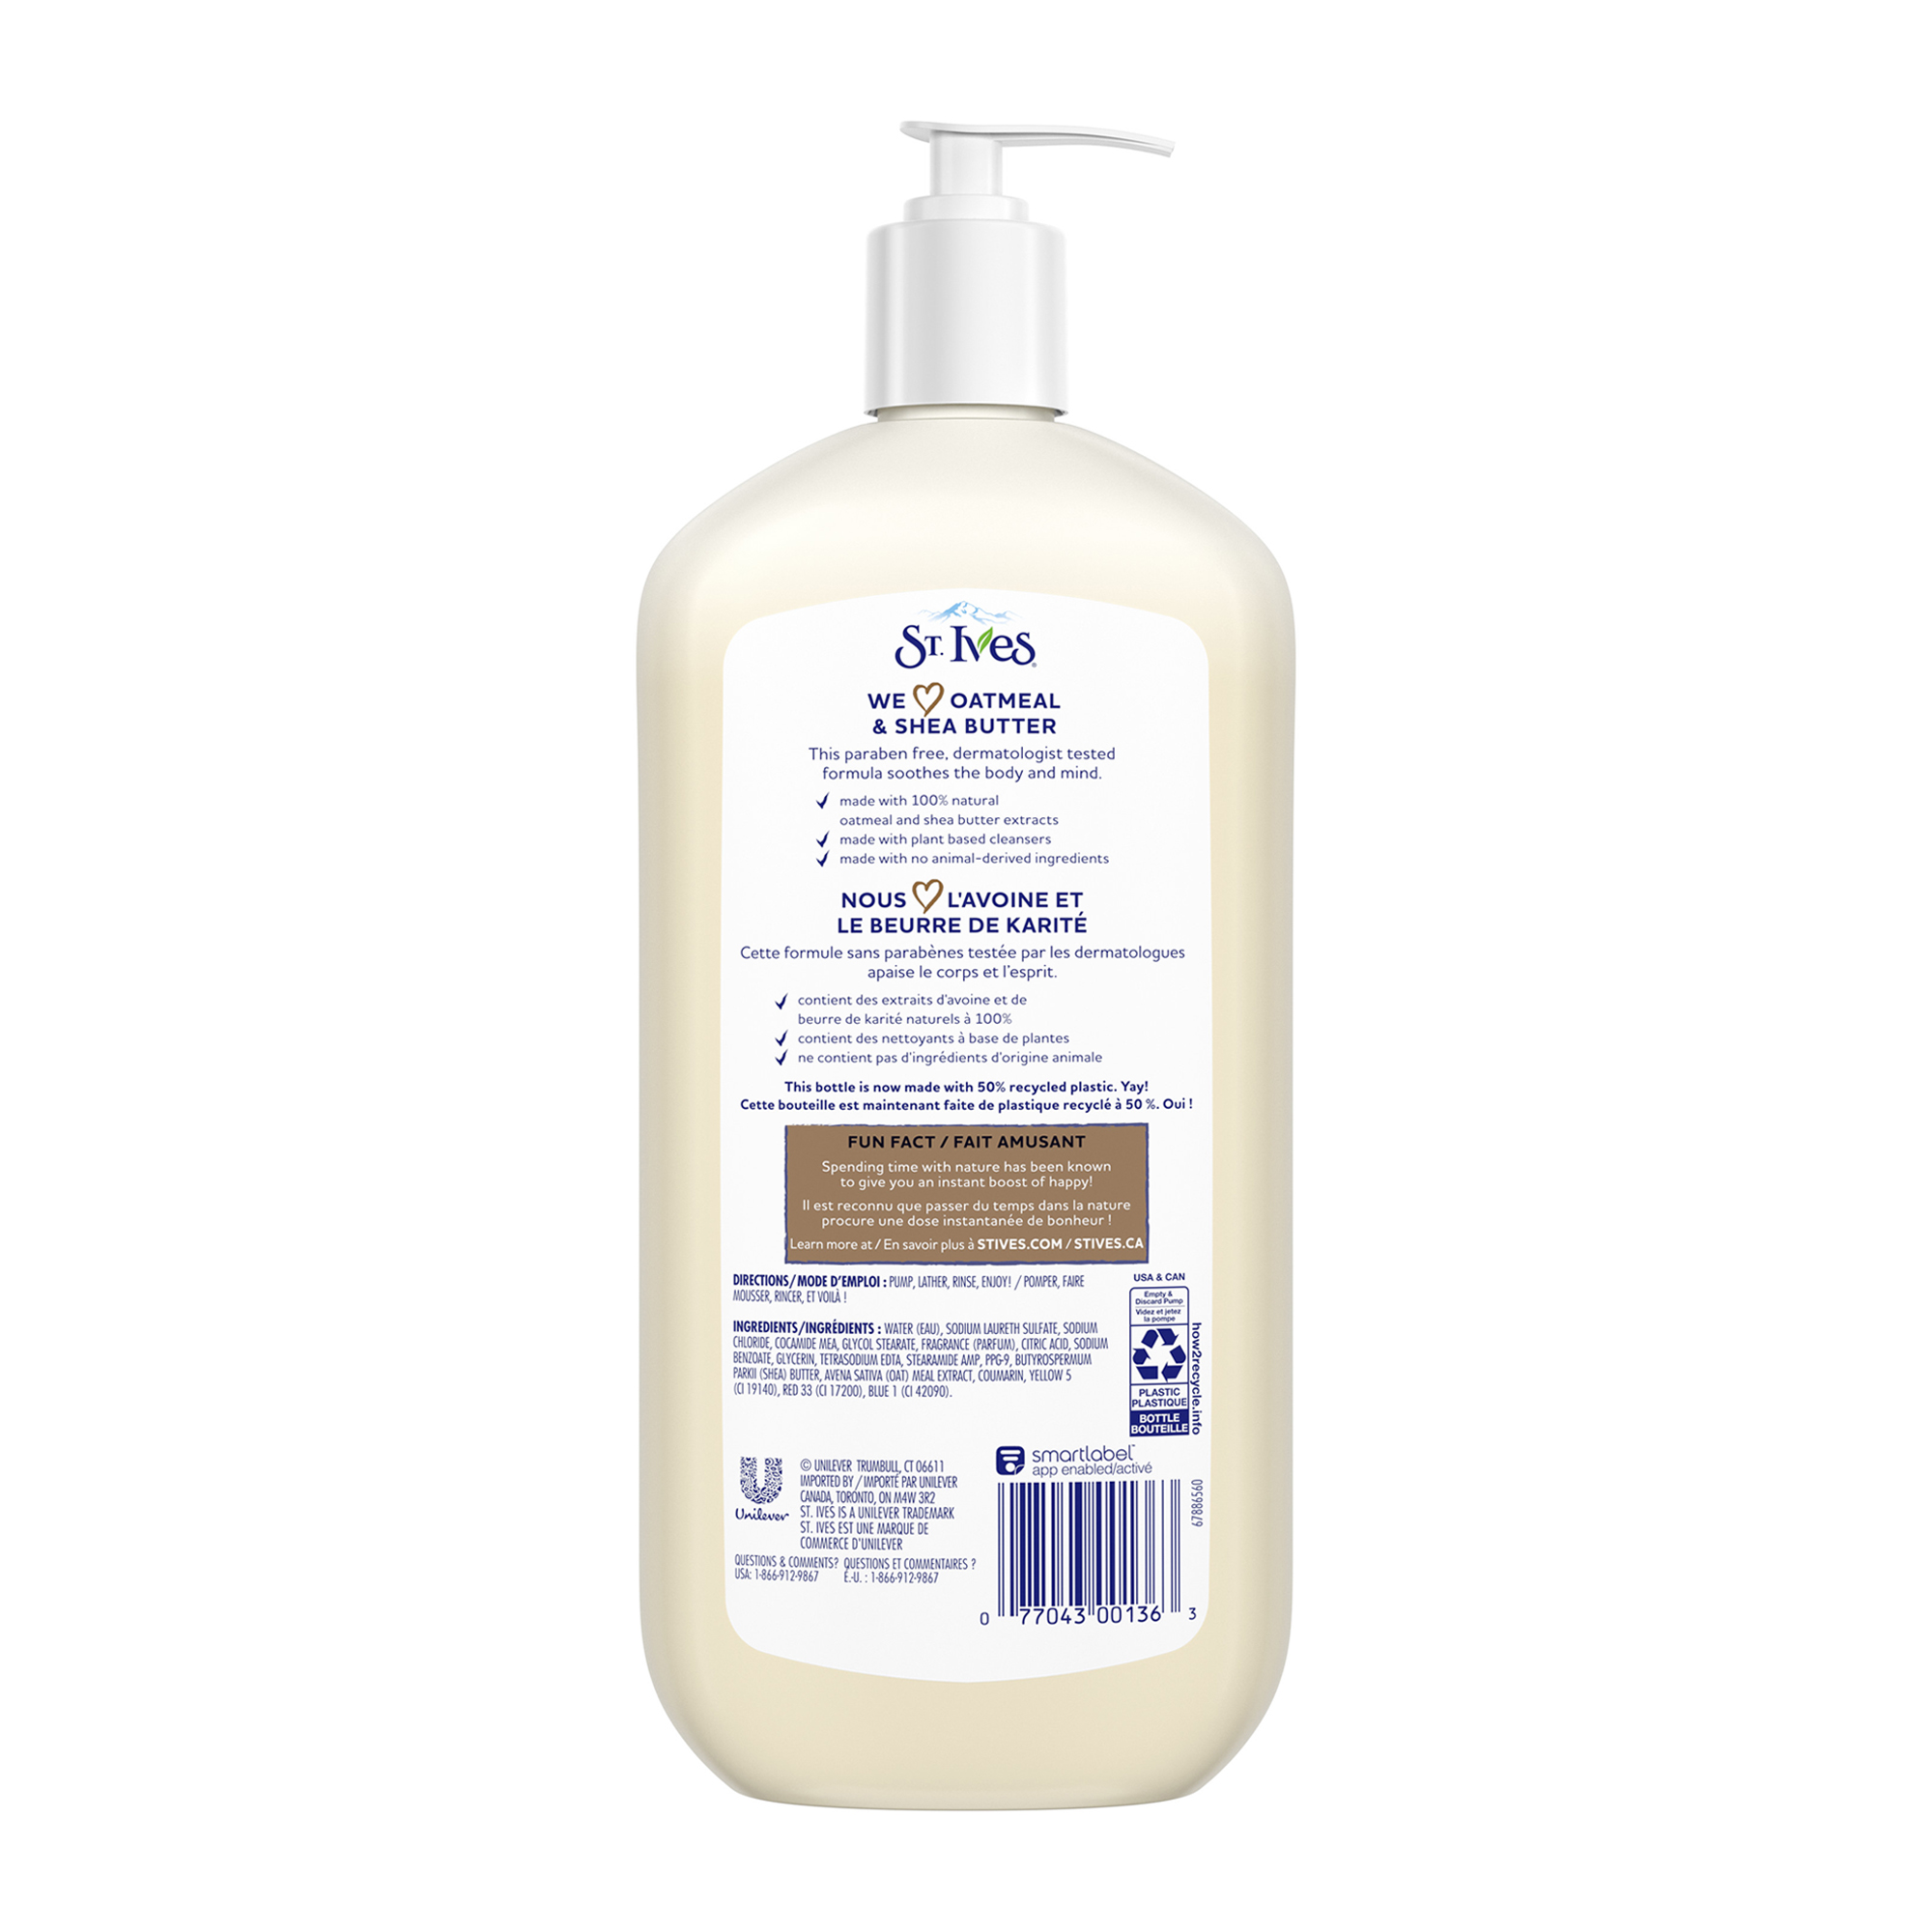 St. Ives Soothing Lqiuid Body Wash with Pump Oatmeal & Shea Butter, 32 oz - image 3 of 6